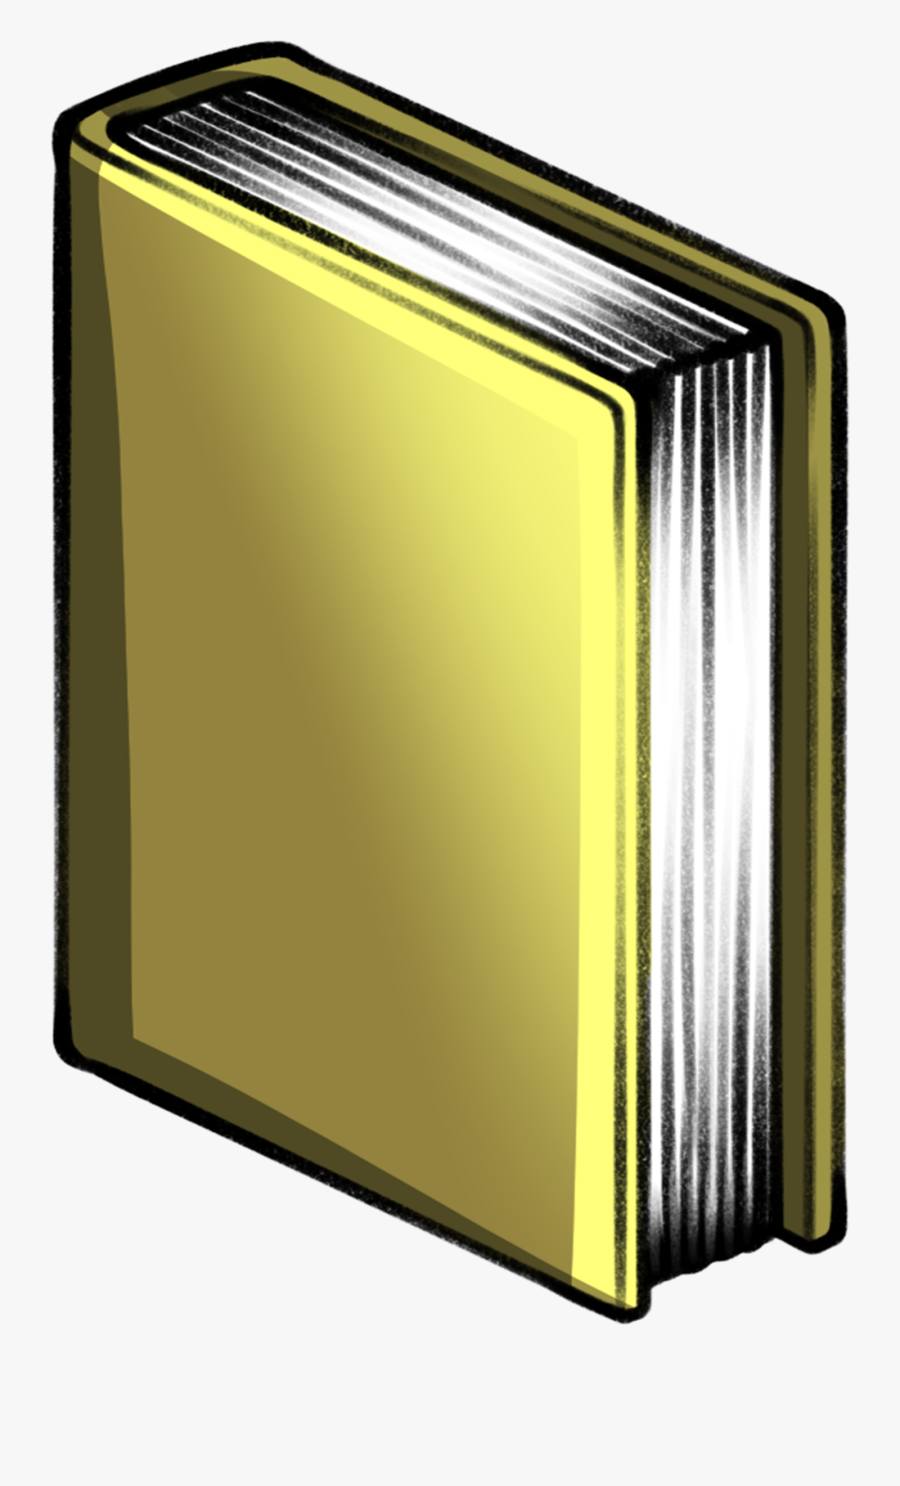 Closed Book Clipart - Vintage Book Standing Up, Transparent Clipart